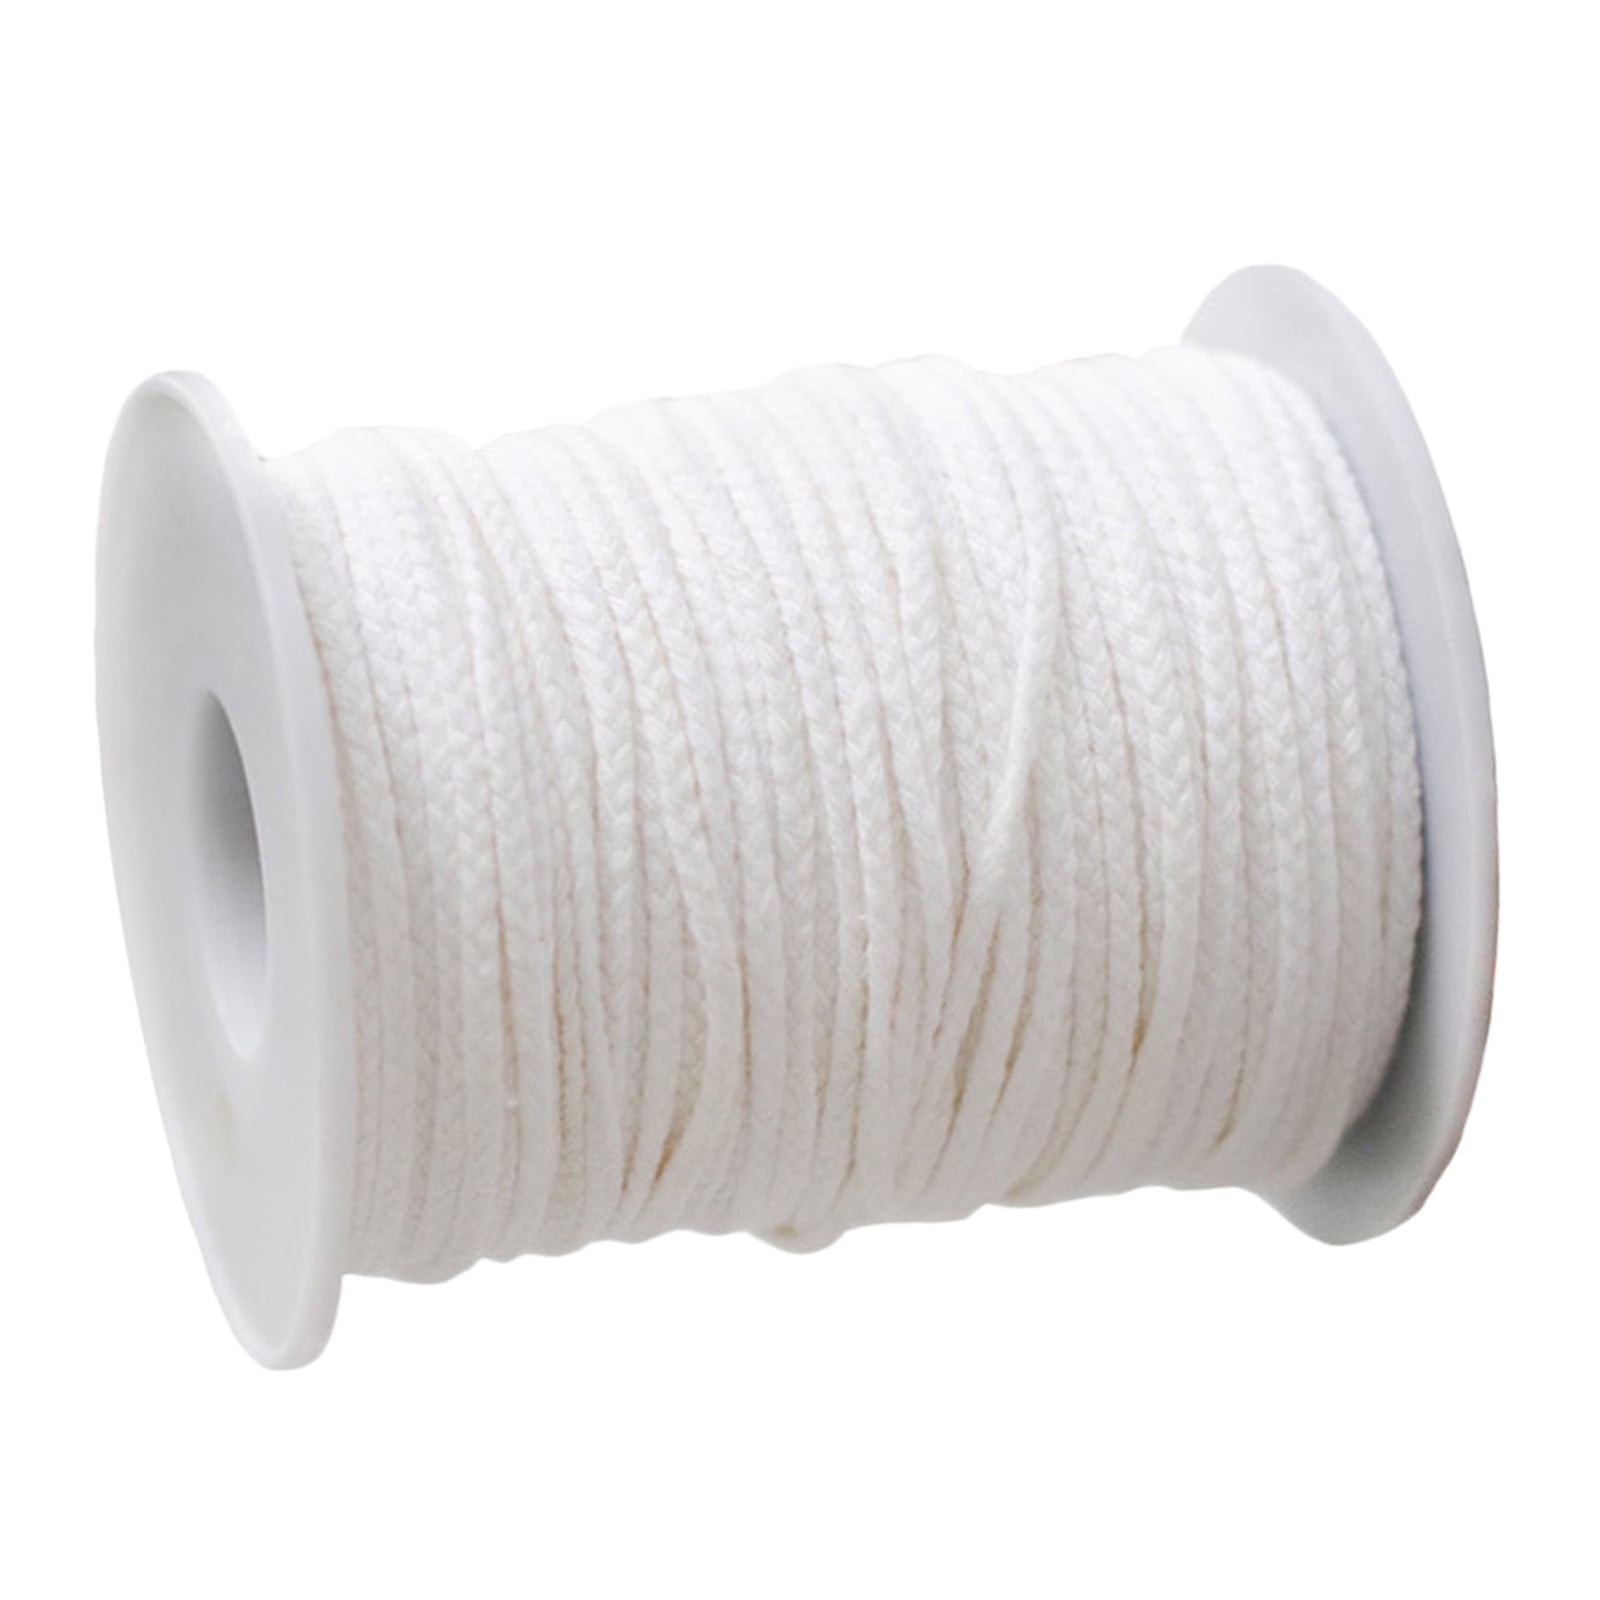 Toyfunny DIY Candle Wick Roll 61M Cotton Rope for Making Candles, Candle Core